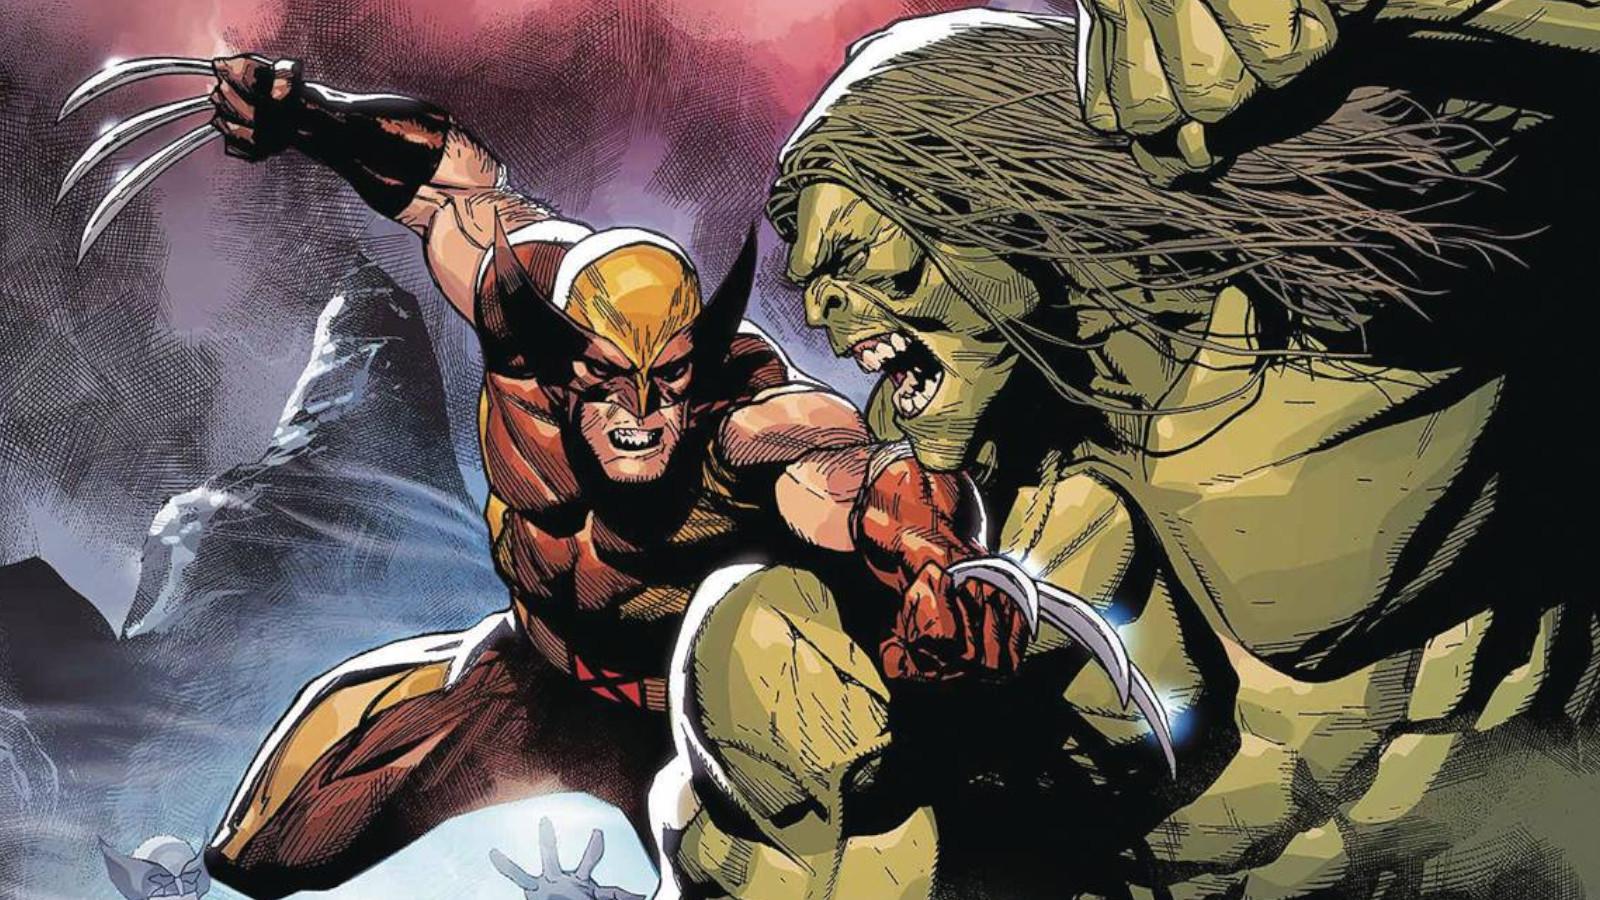 Wolverine faces off against the Hulk